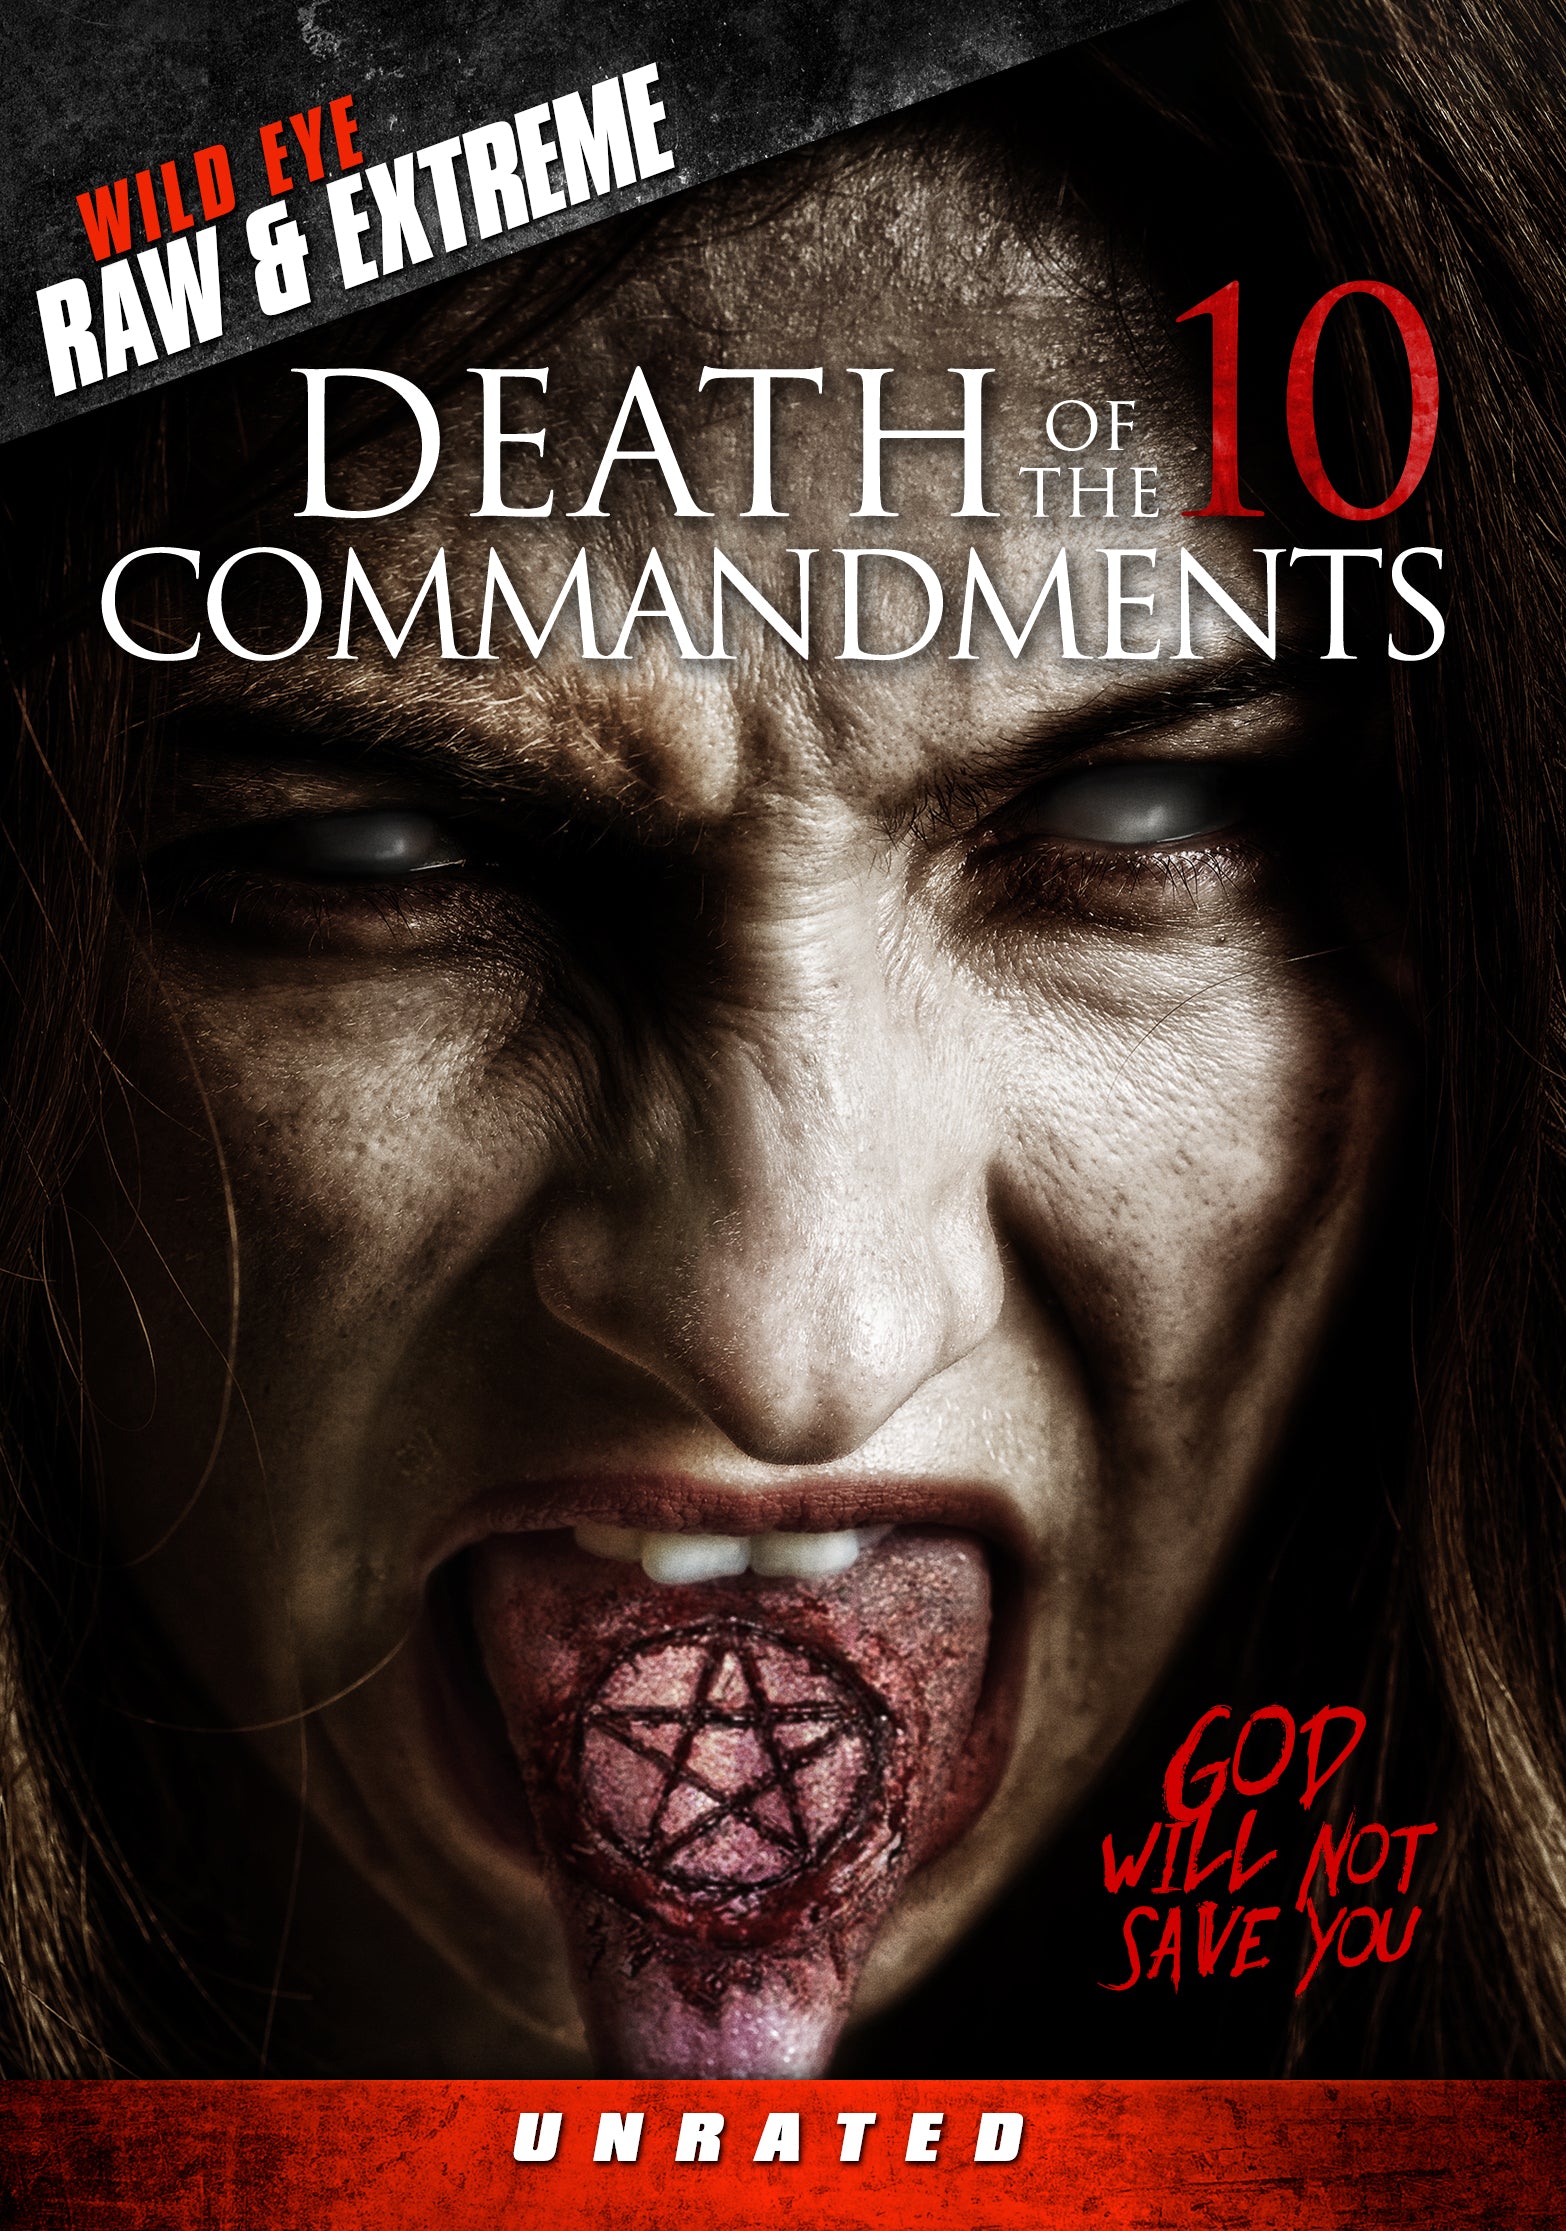 THE DEATH OF THE 10 COMMANDMENTS DVD